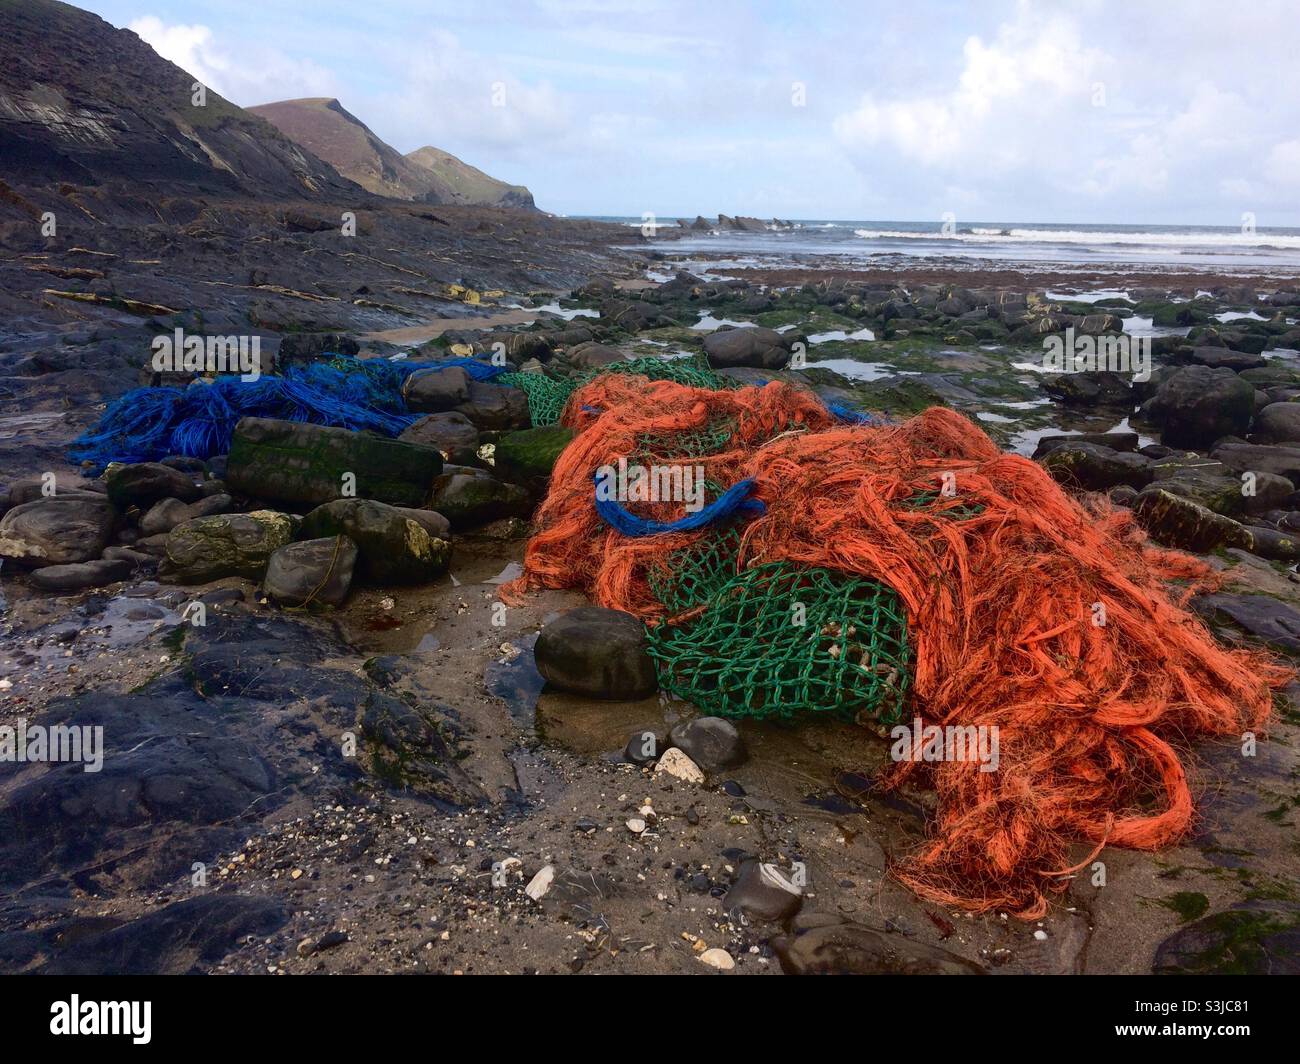 Washed up fishing gear on the shore including ropes and fishing